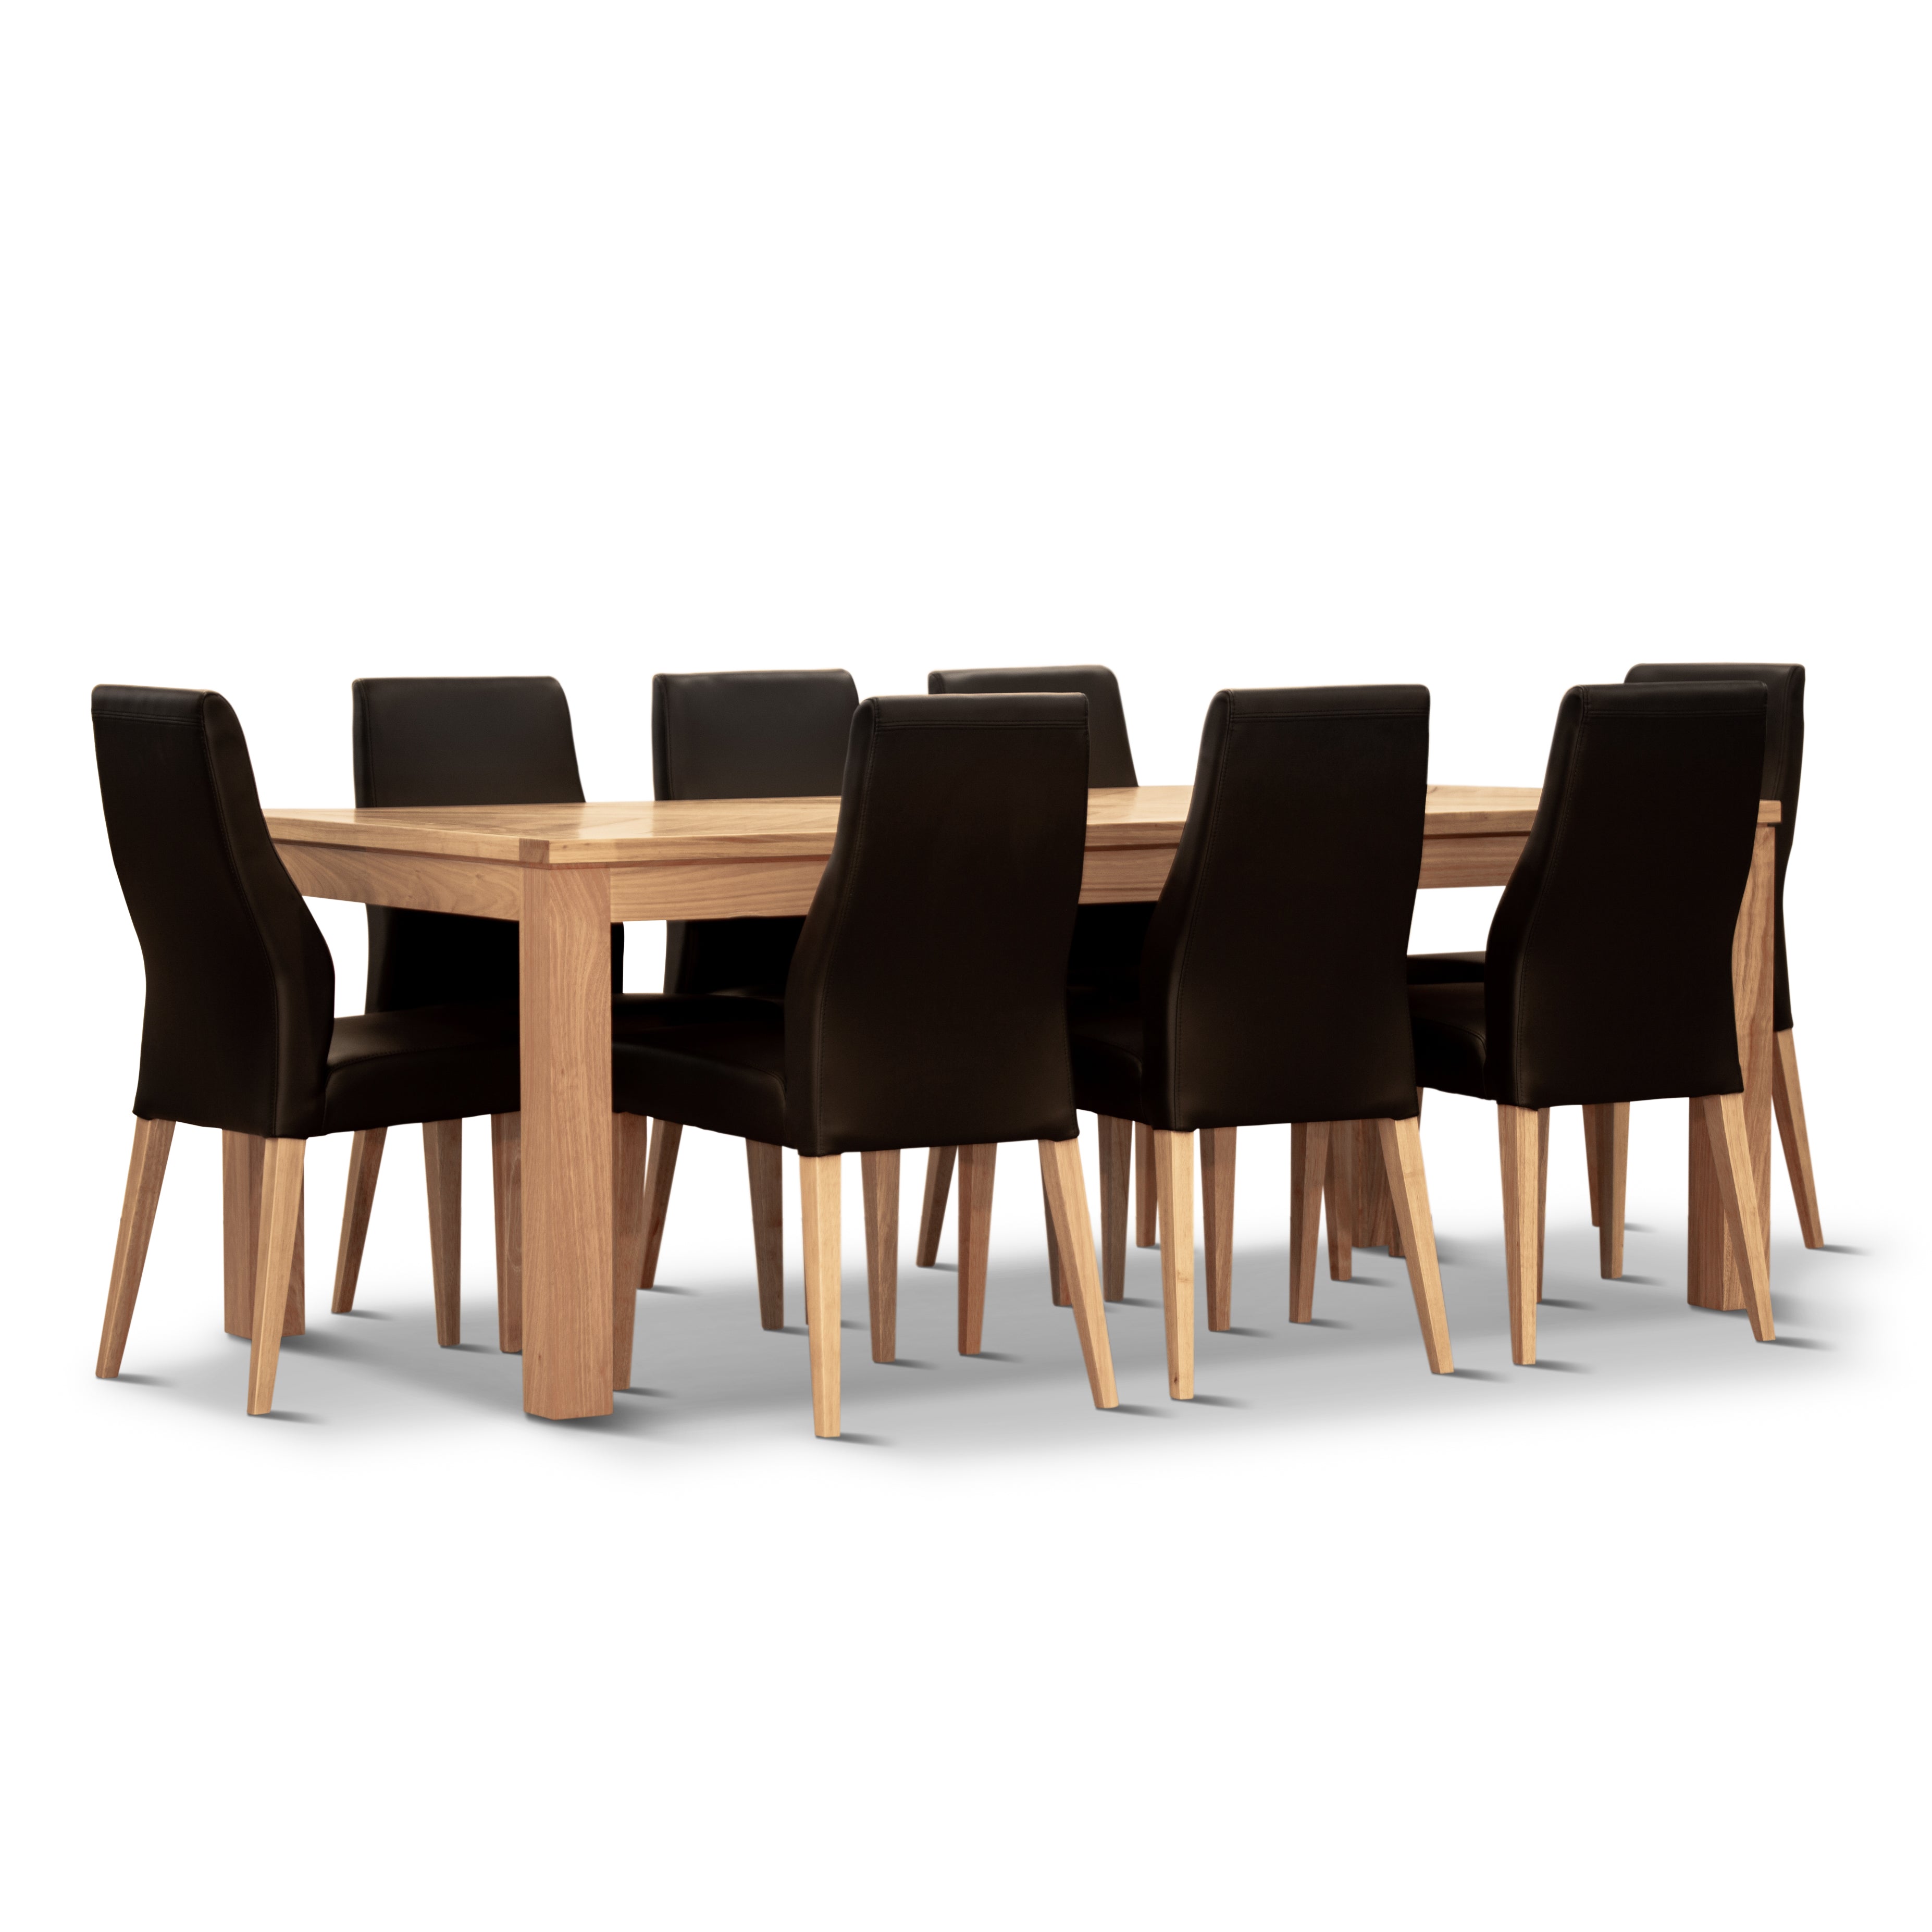 Set of 6 PU Leather Seat Solid Messmate Timber - Black